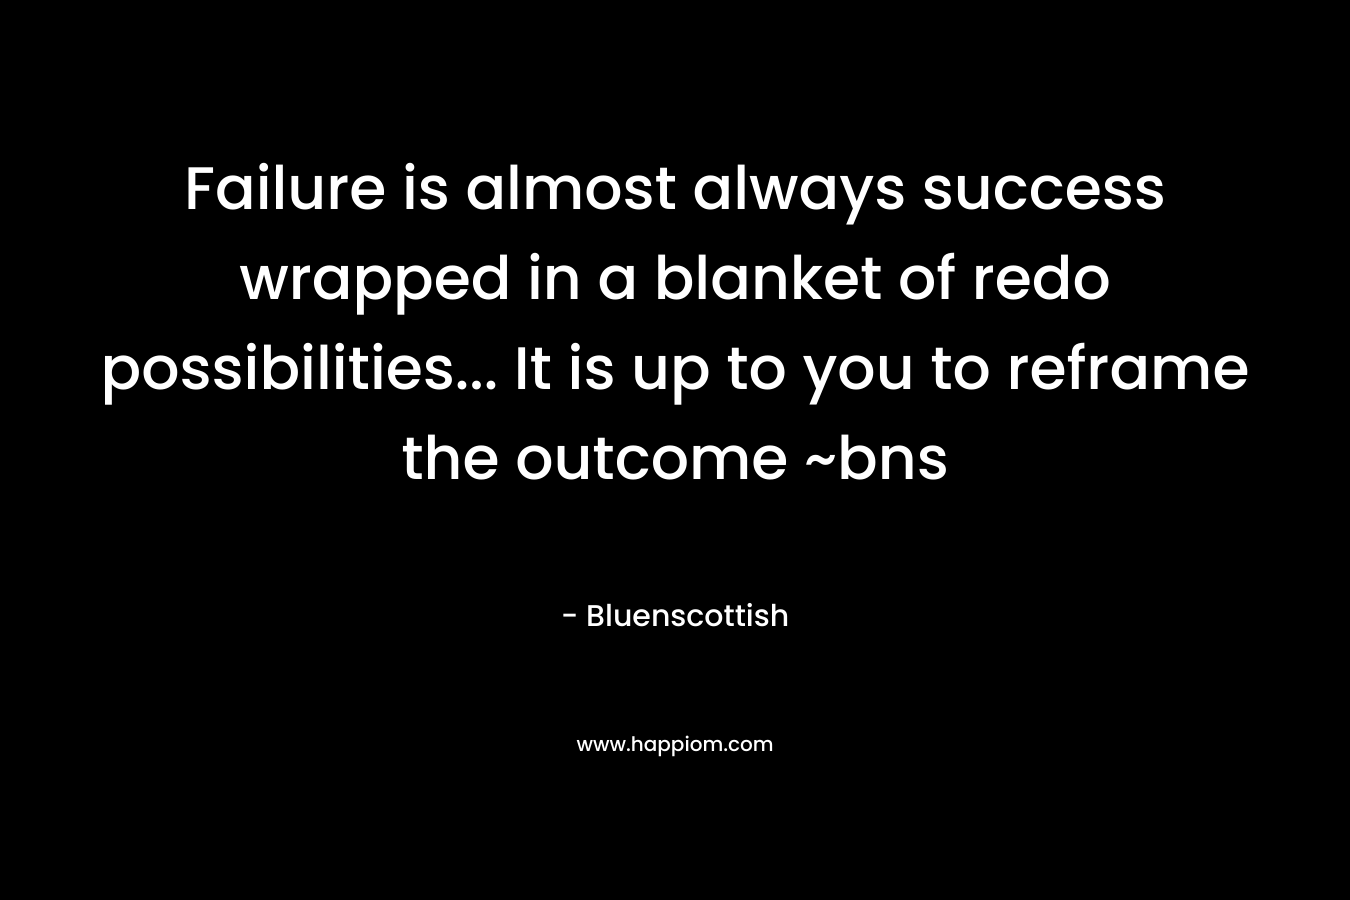 Failure is almost always success wrapped in a blanket of redo possibilities… It is up to you to reframe the outcome ~bns – Bluenscottish